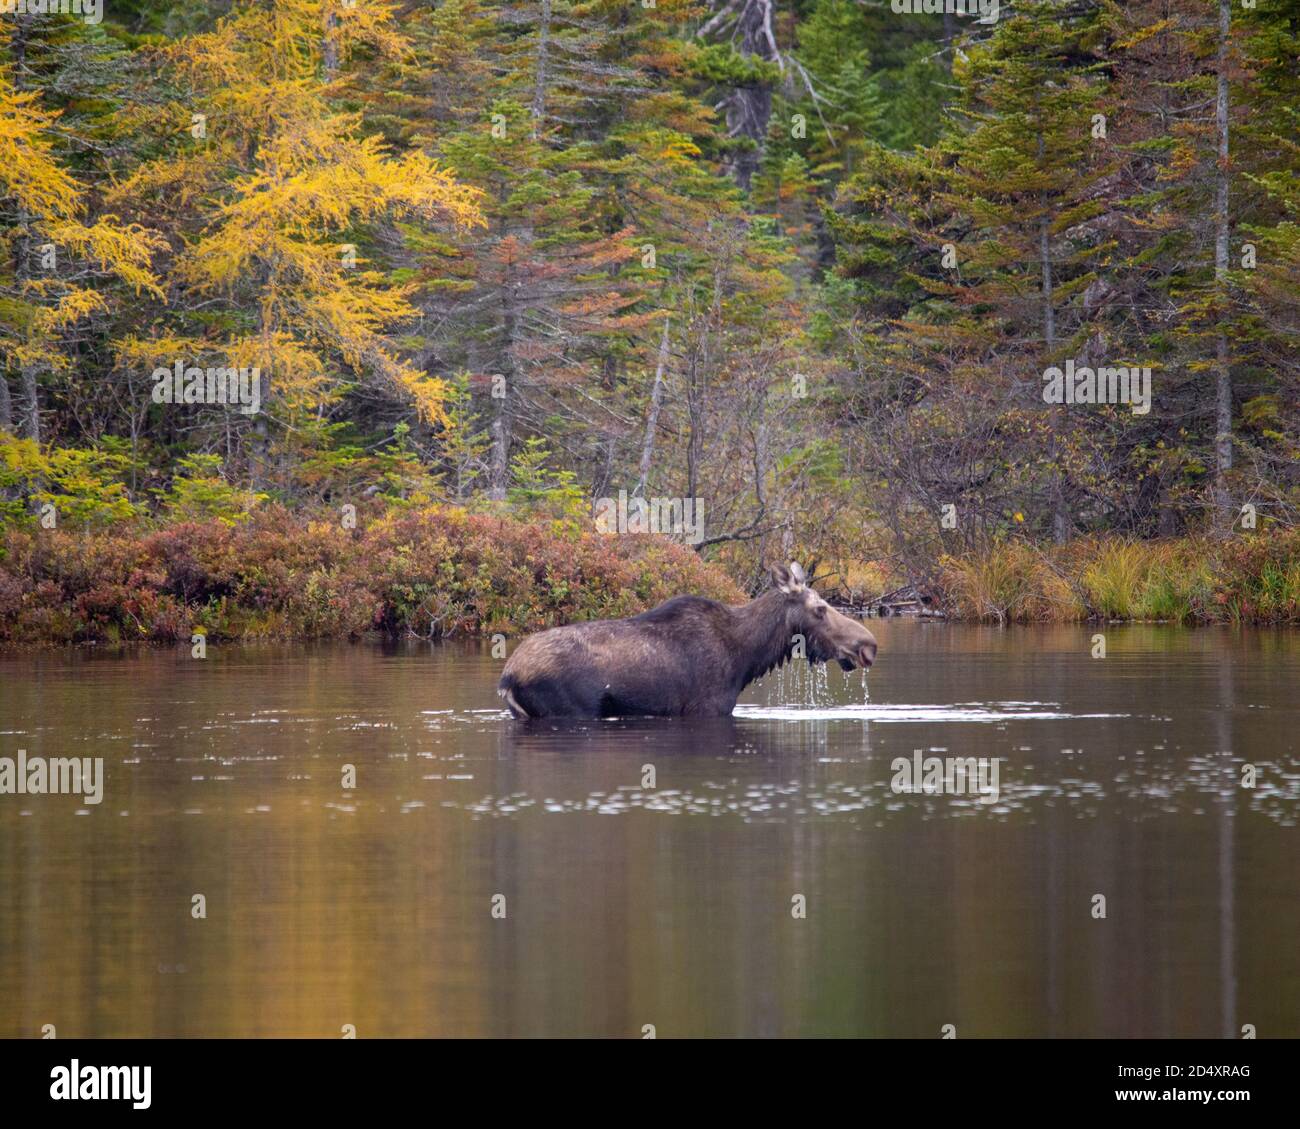 Moose Wading in Sandy Pond, Baxter state Park Maine durante la Fogy Fall Day. Foto Stock